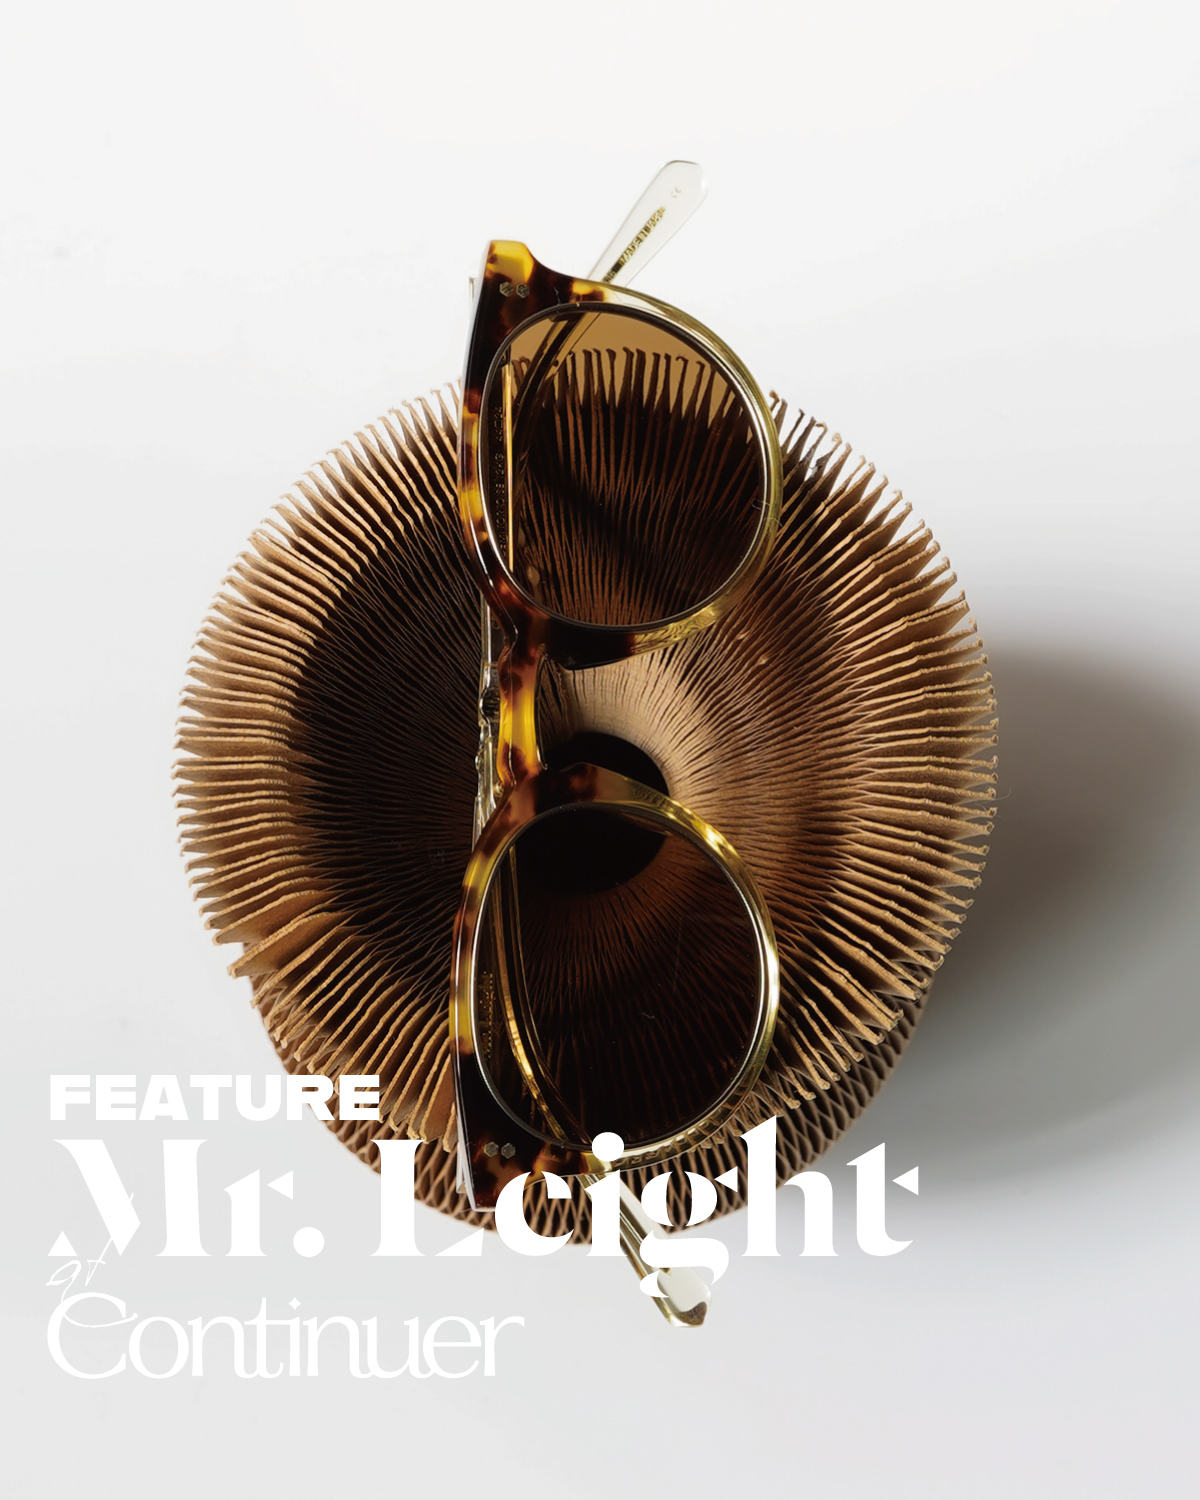 FEATURE｜Mr. Leight